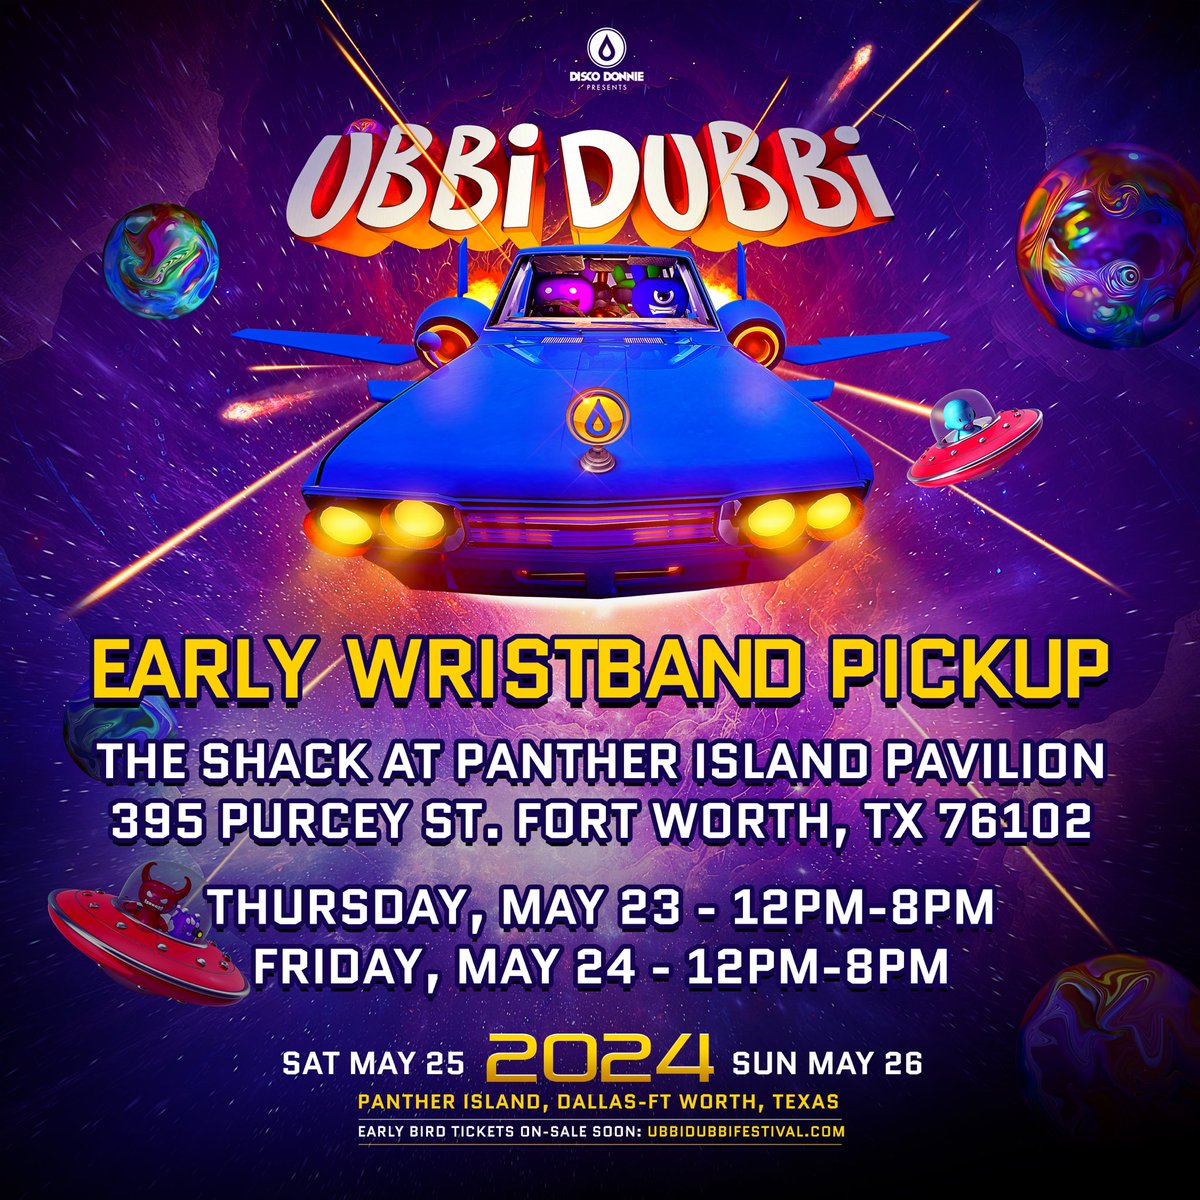 Missed the shipping deadline for your wristband? Swing by The Shack at Panther Island Pavilion on May 23rd or 24th from 12pm-8pm to get yours. Remember to bring your ID!🚀